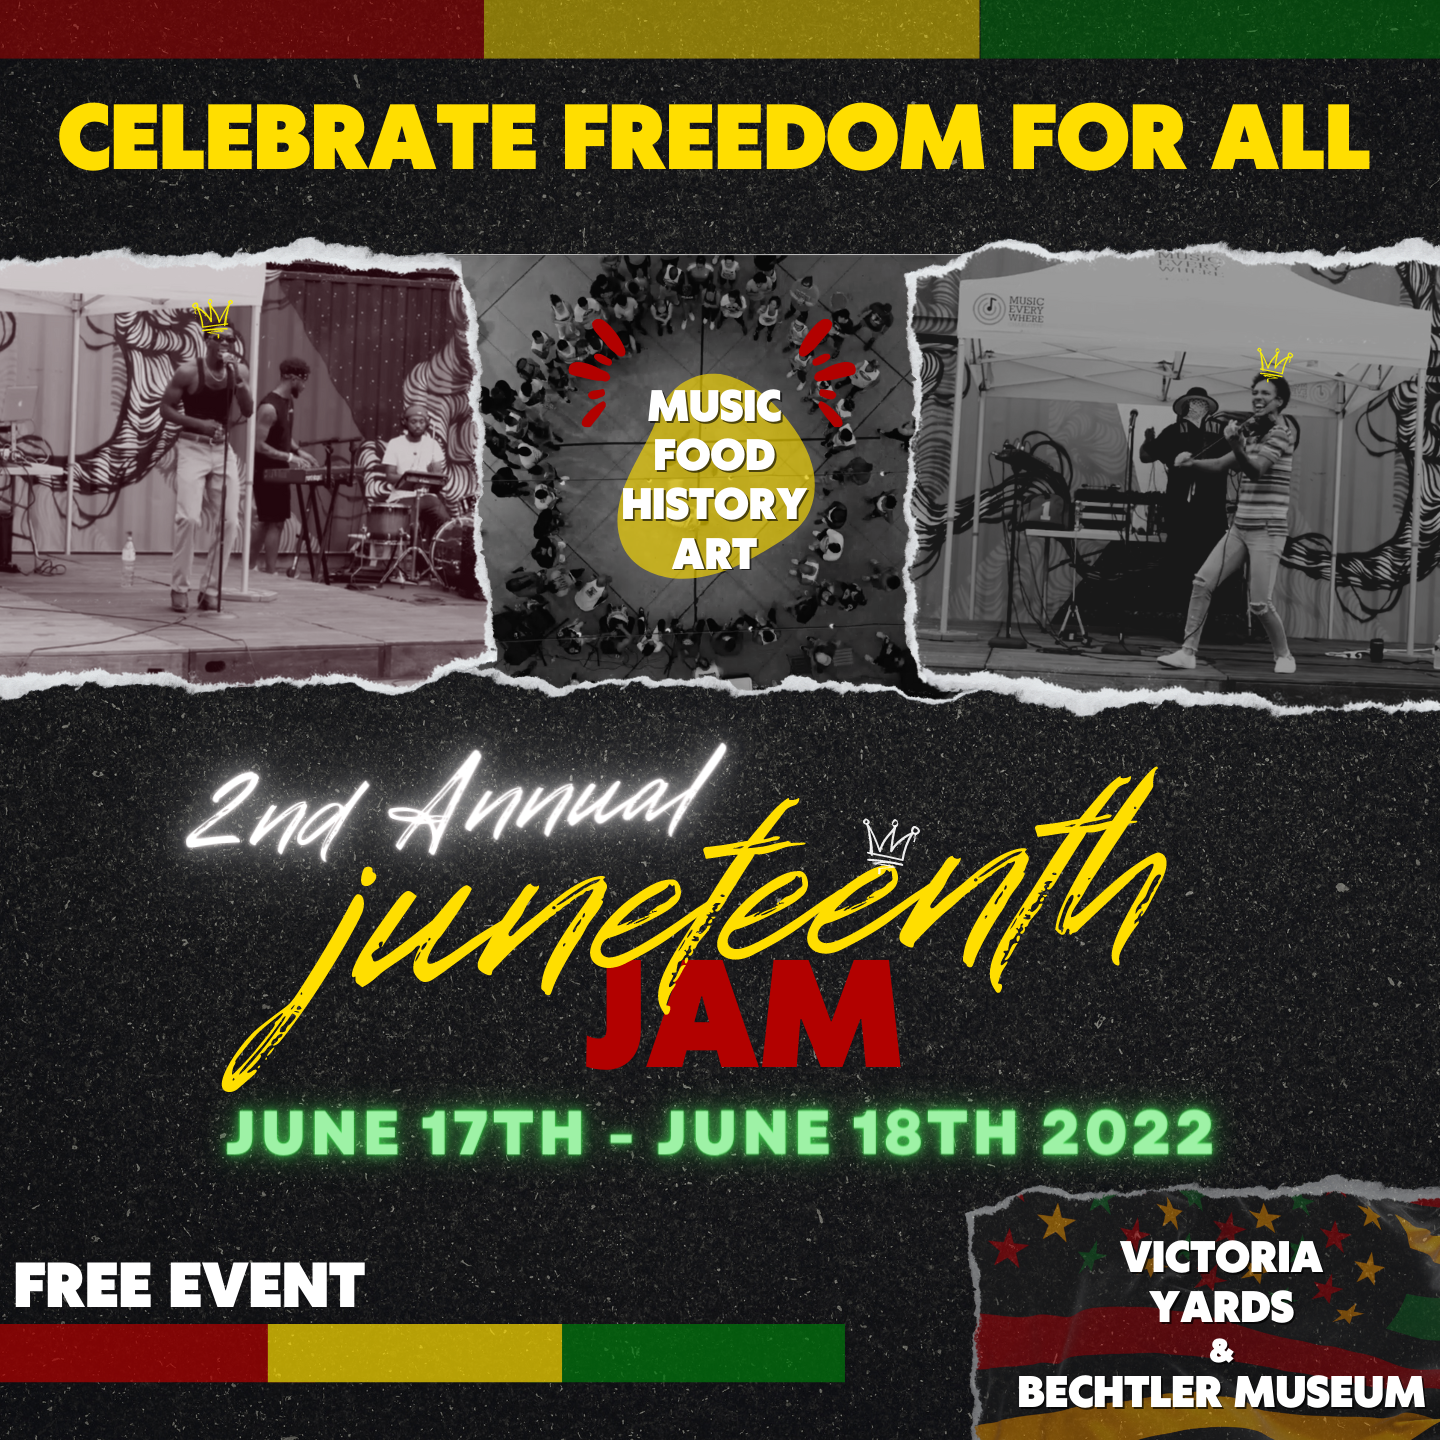 More Info for Blumenthal’s 2nd Annual Juneteenth Jam:  A FREE Community Event Celebrating Freedom for All!